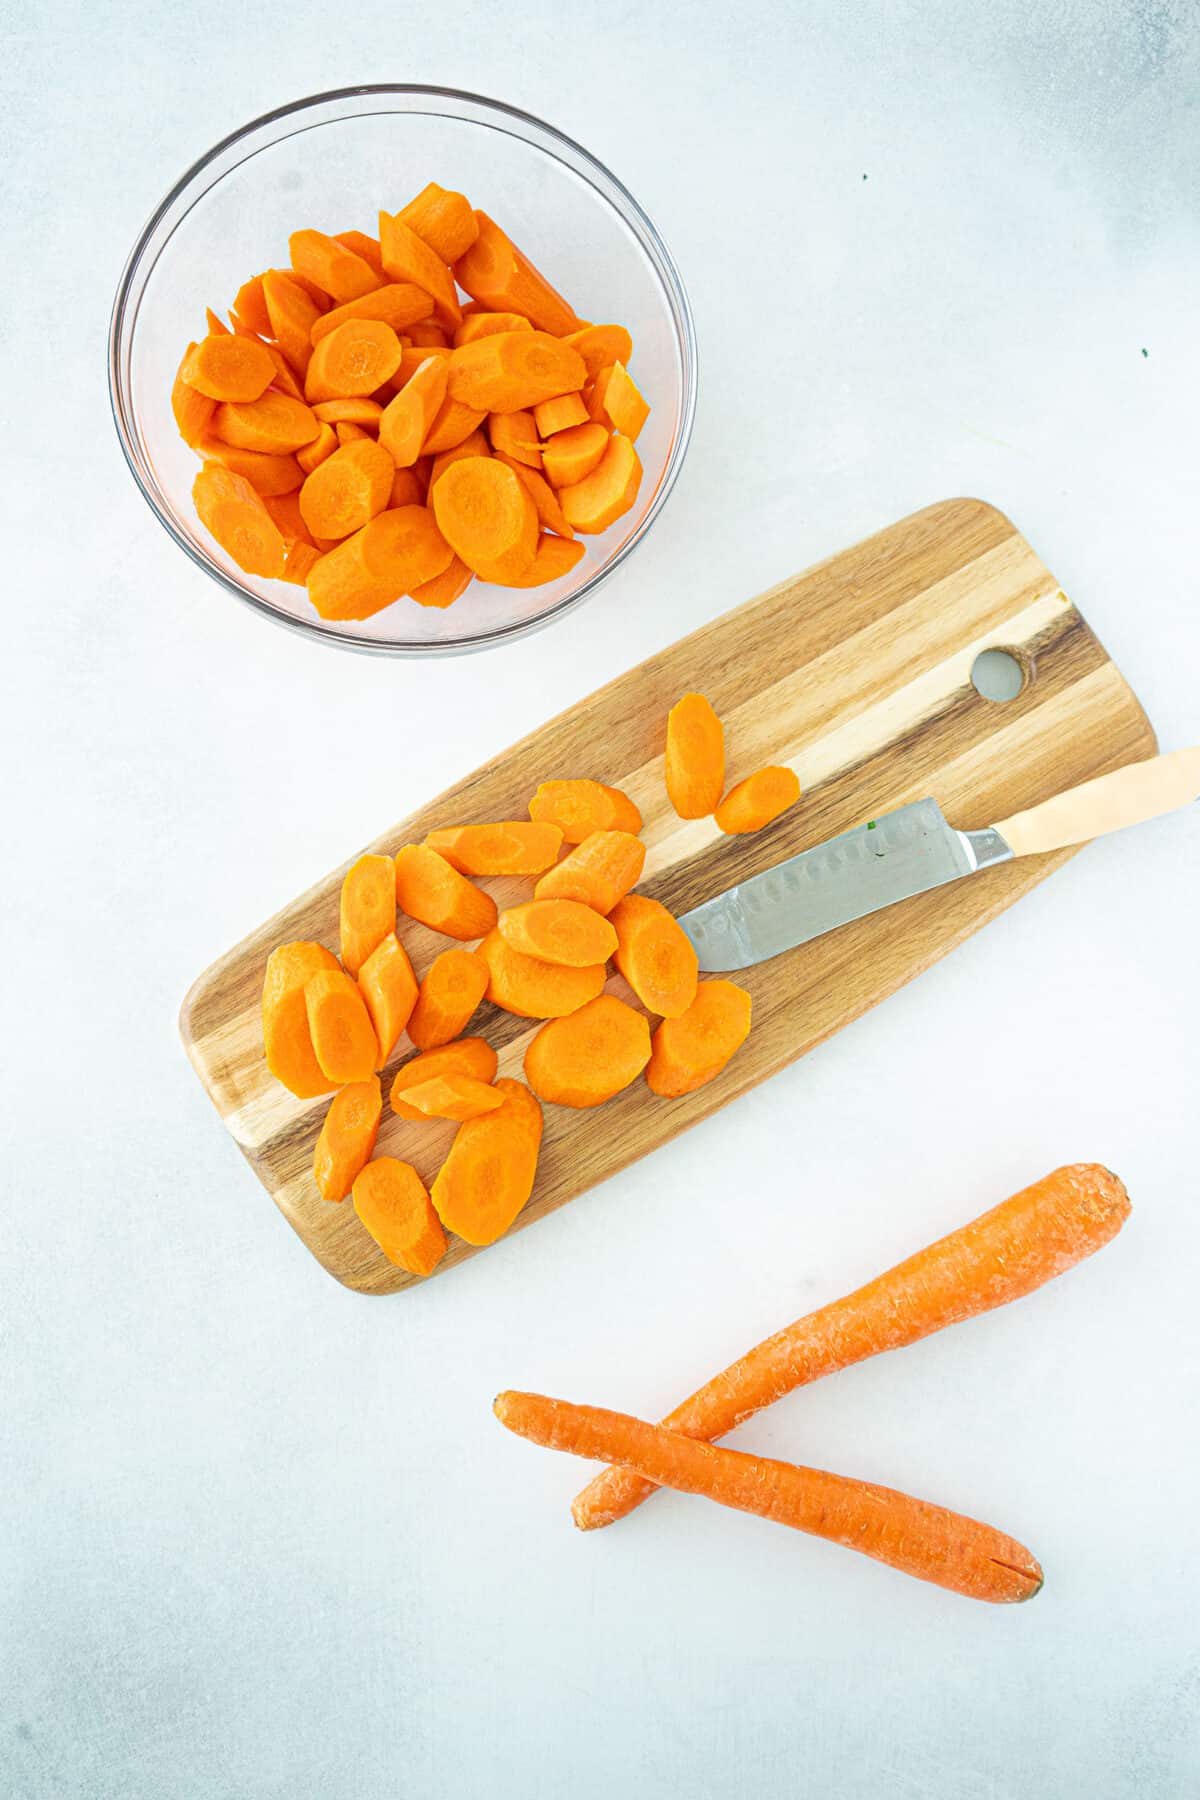 picture of cutting carrots on a cutting board